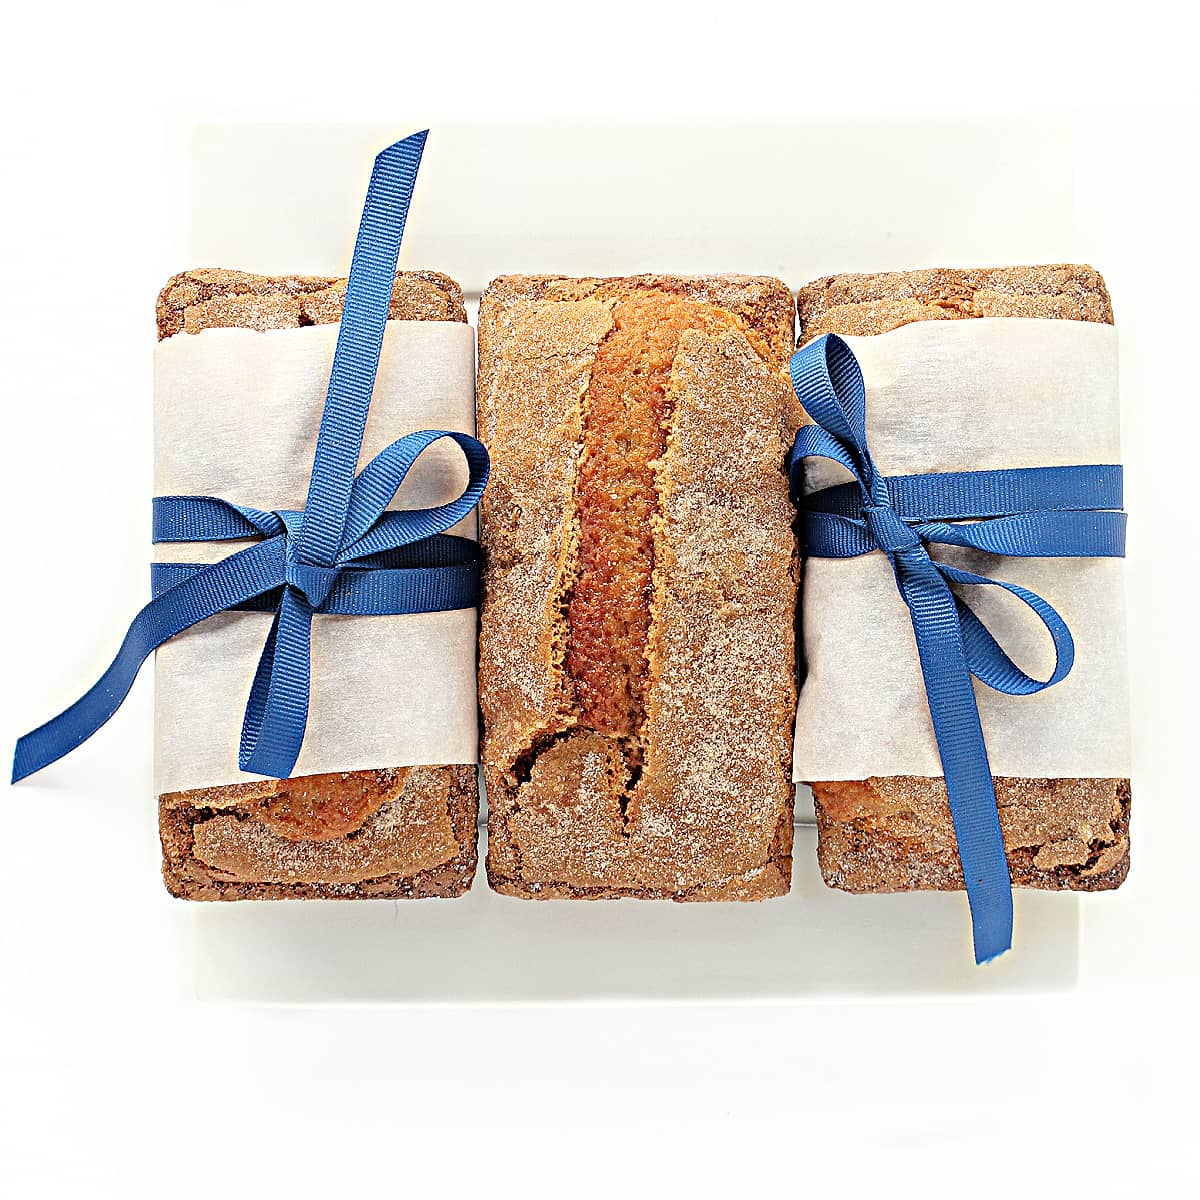 Three mini loaves on a plate, two wrapped with parchment and blue ribbon.